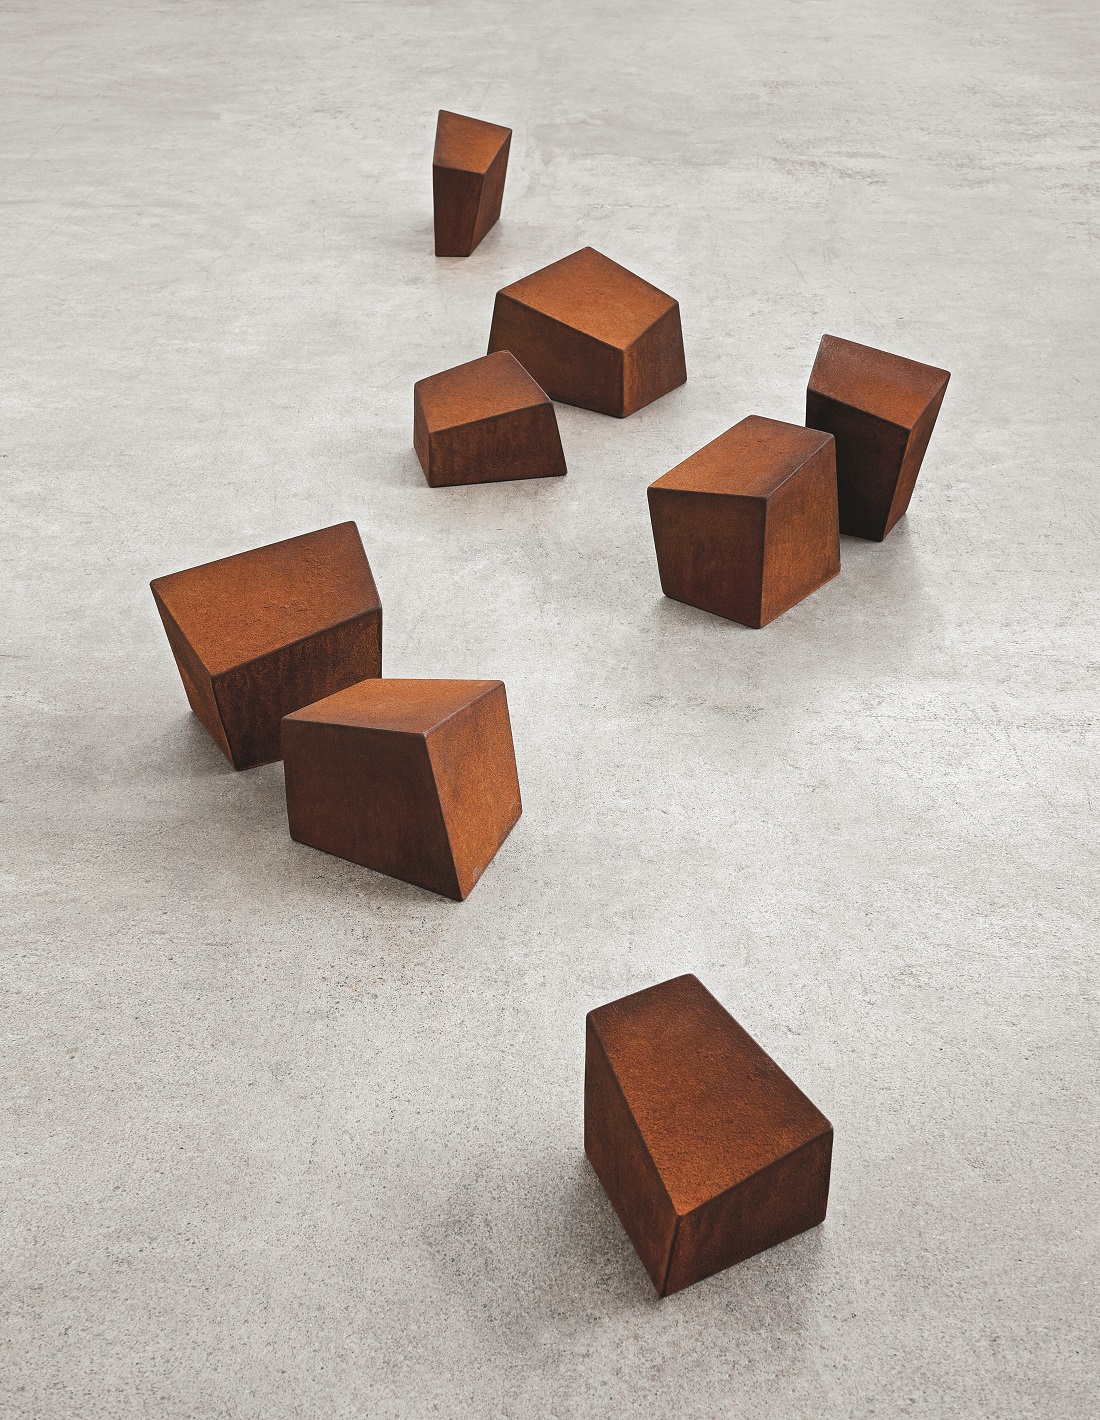 
		                					Tom Joyce		                																	
																											<i>Divided IV,</i>  
																																								2013-2015, 
																																								cast iron (alloy made from iron fragments retreived from projects 1977-2013), 
																																								14 x 14 x 14 inch cube (eight elements assembled), installation dimensions variable 
																								
		                				